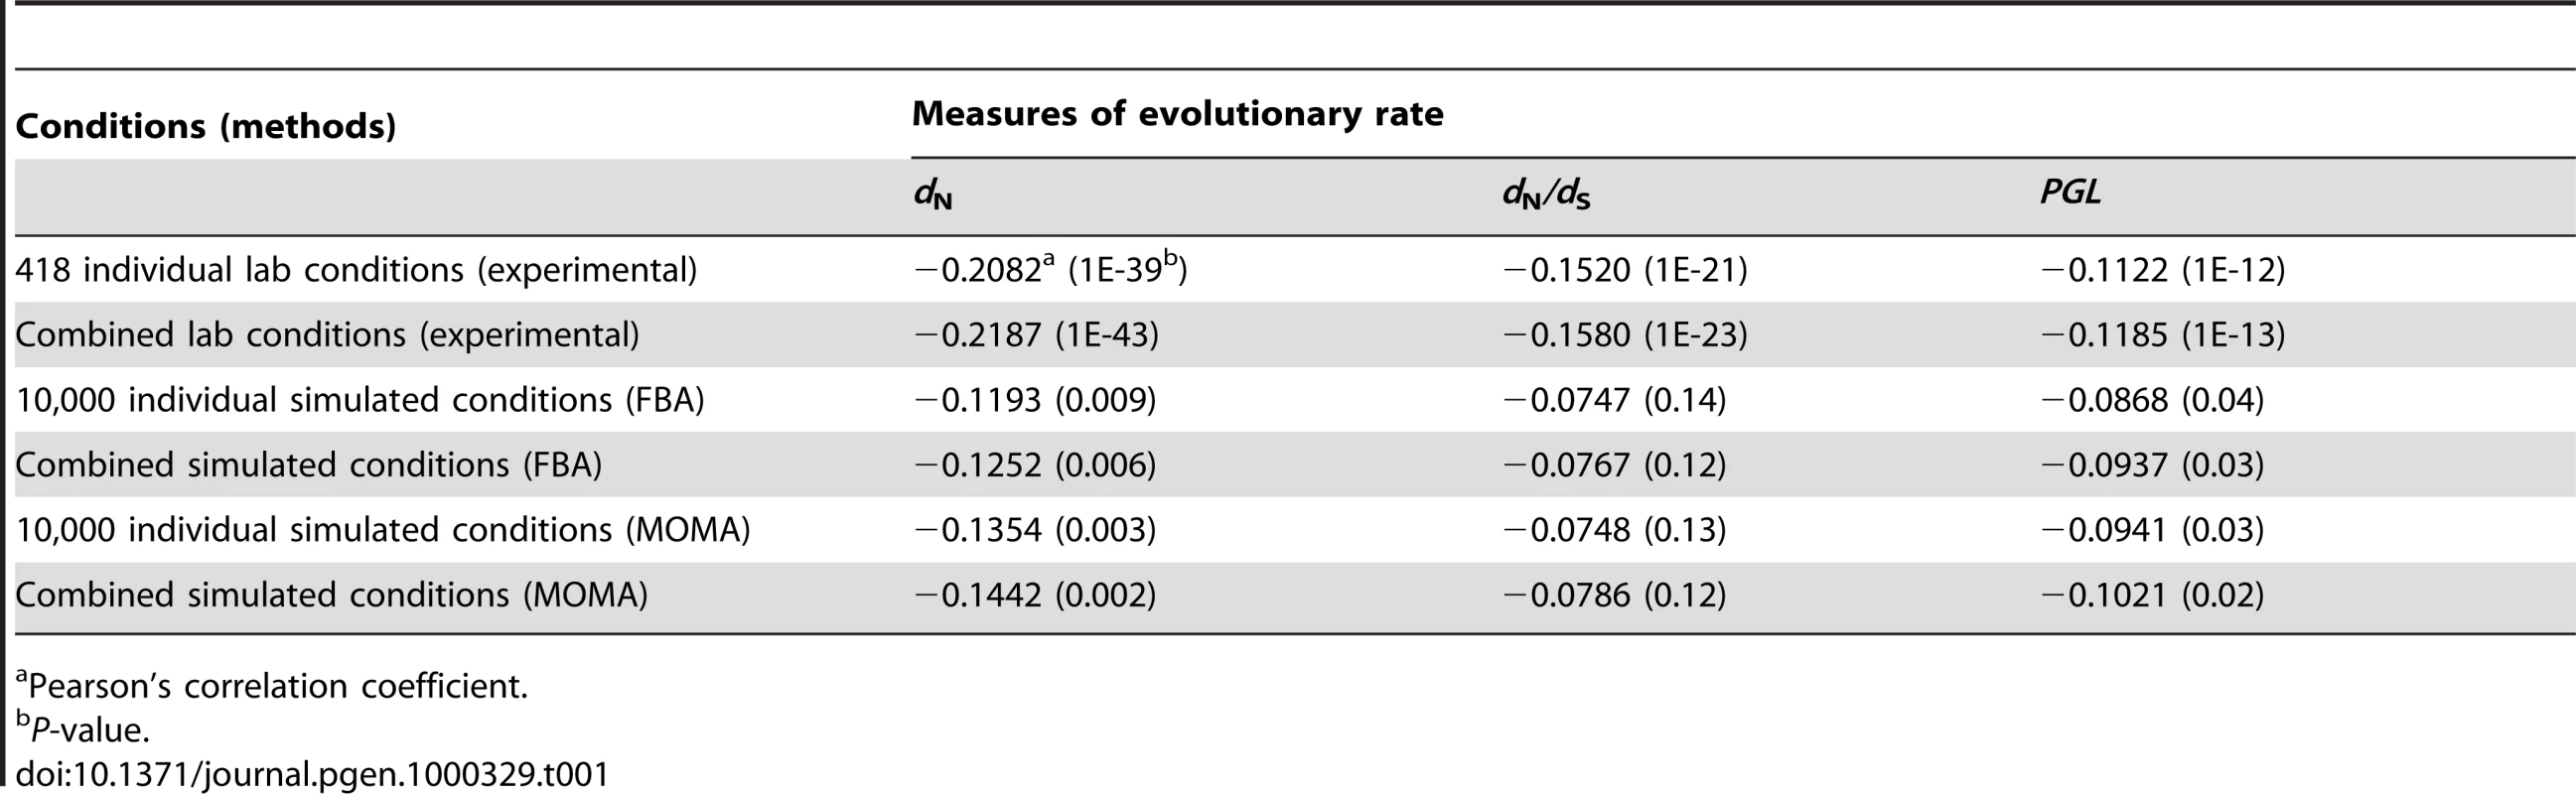 Strongest correlations between gene evolutionary rate and importance measured at different conditions.